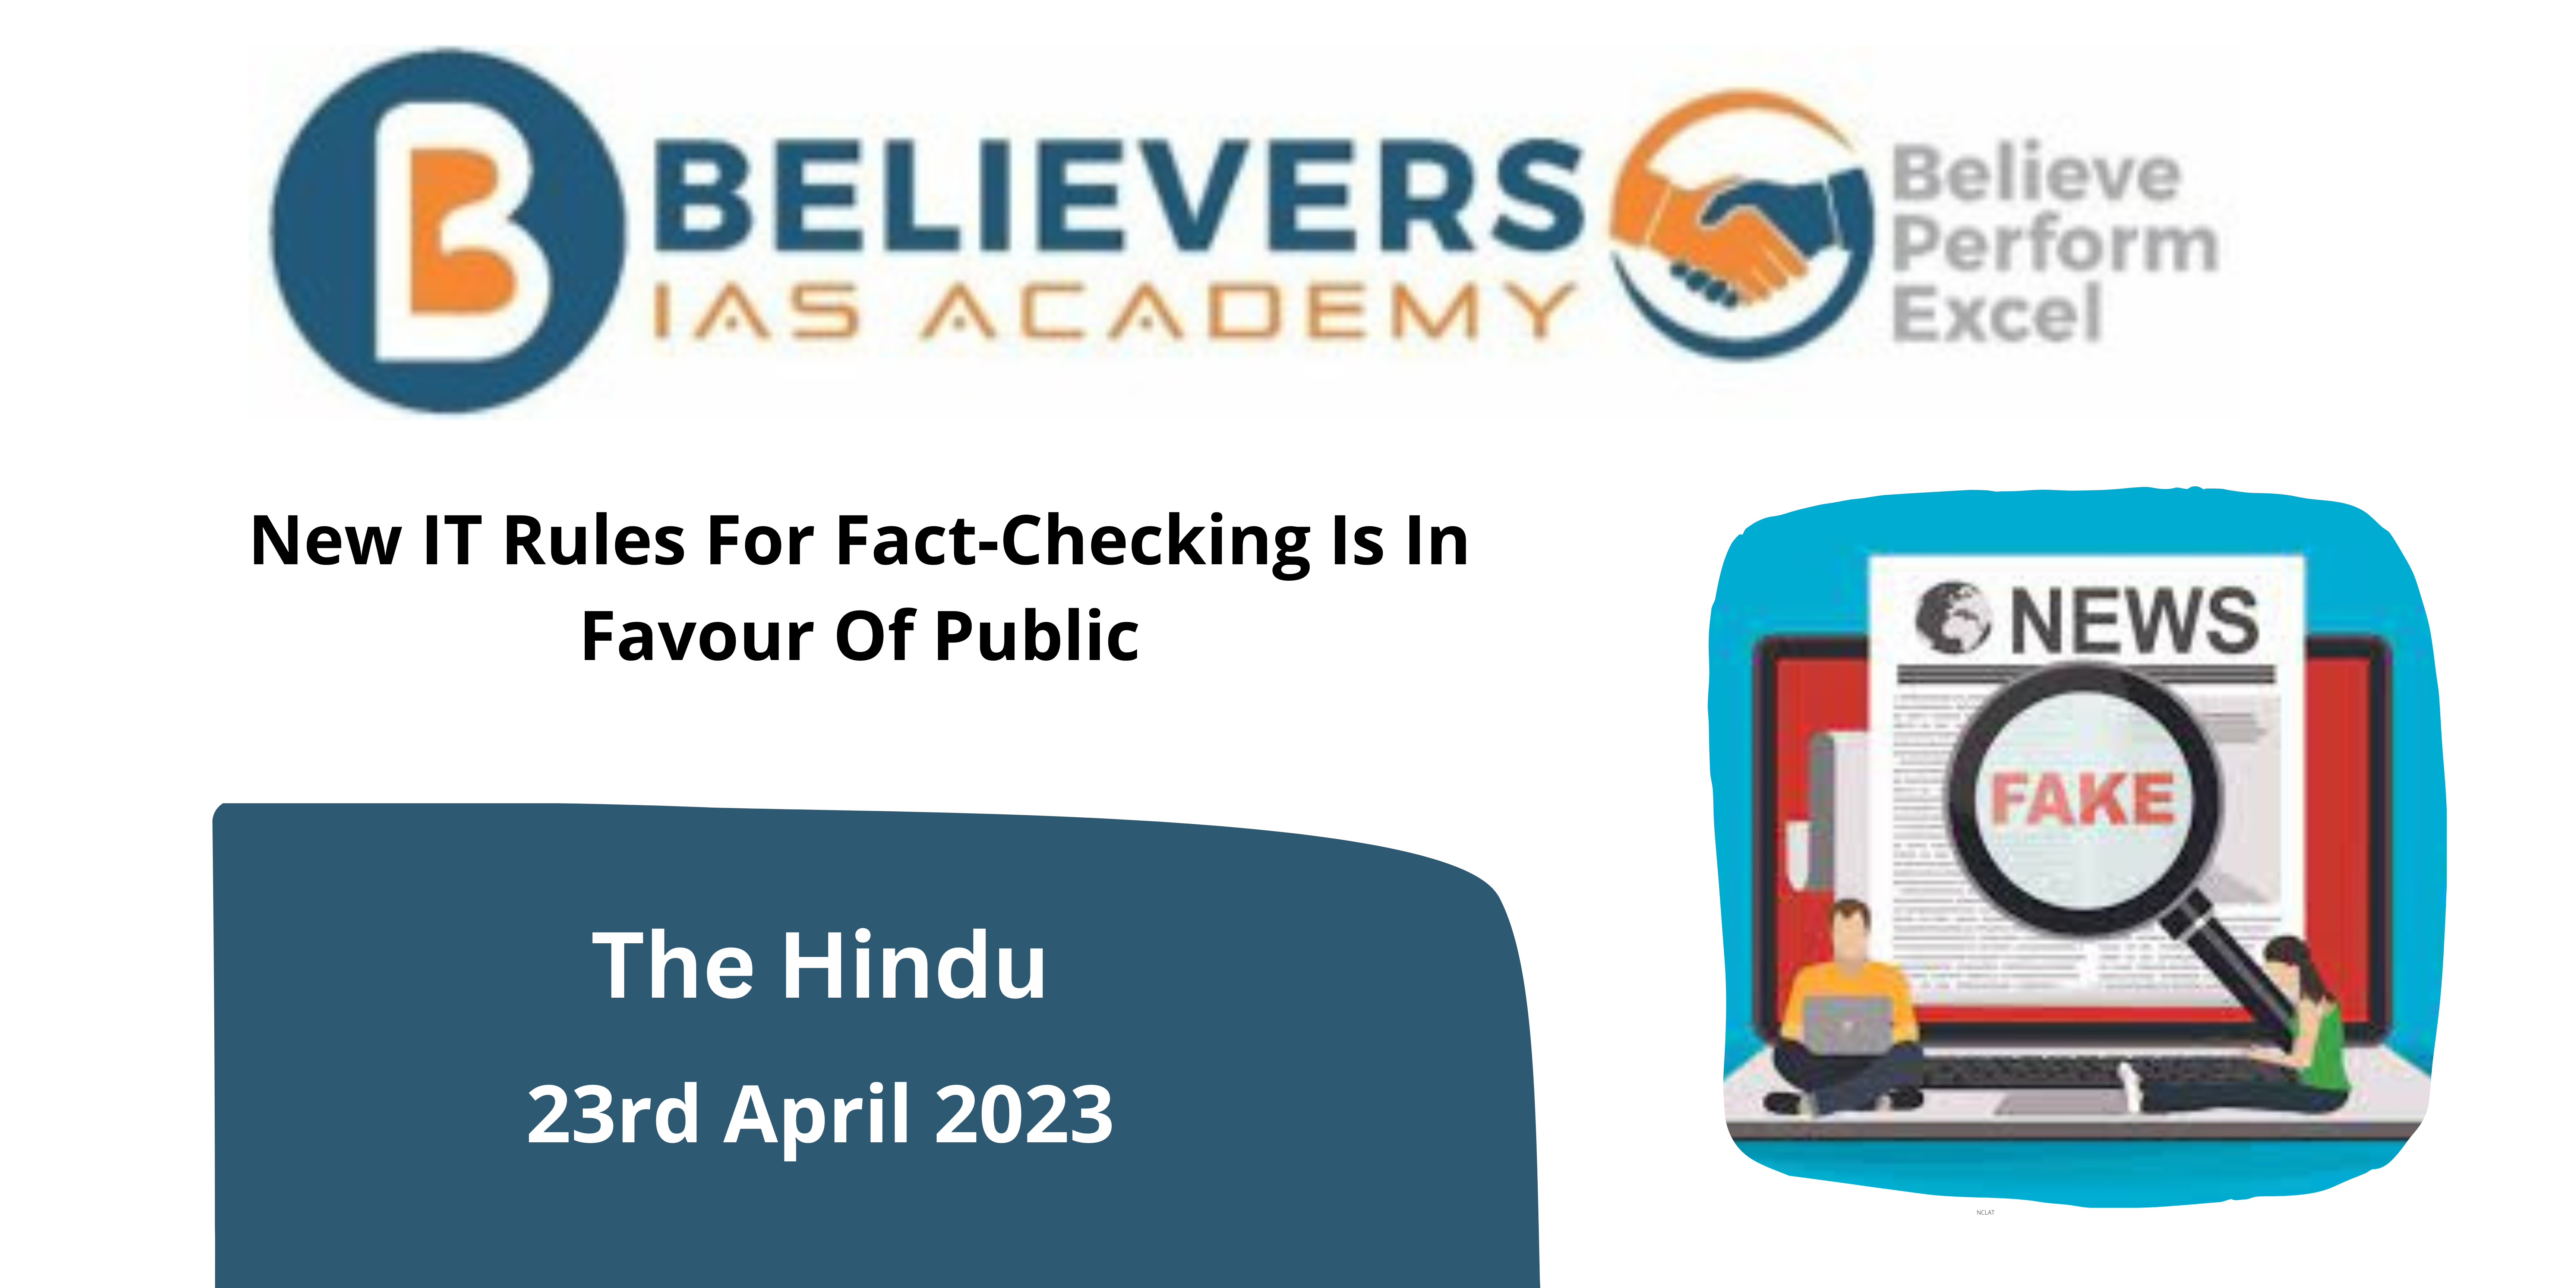 New IT Rules For Fact-Checking Is In Favour Of Public